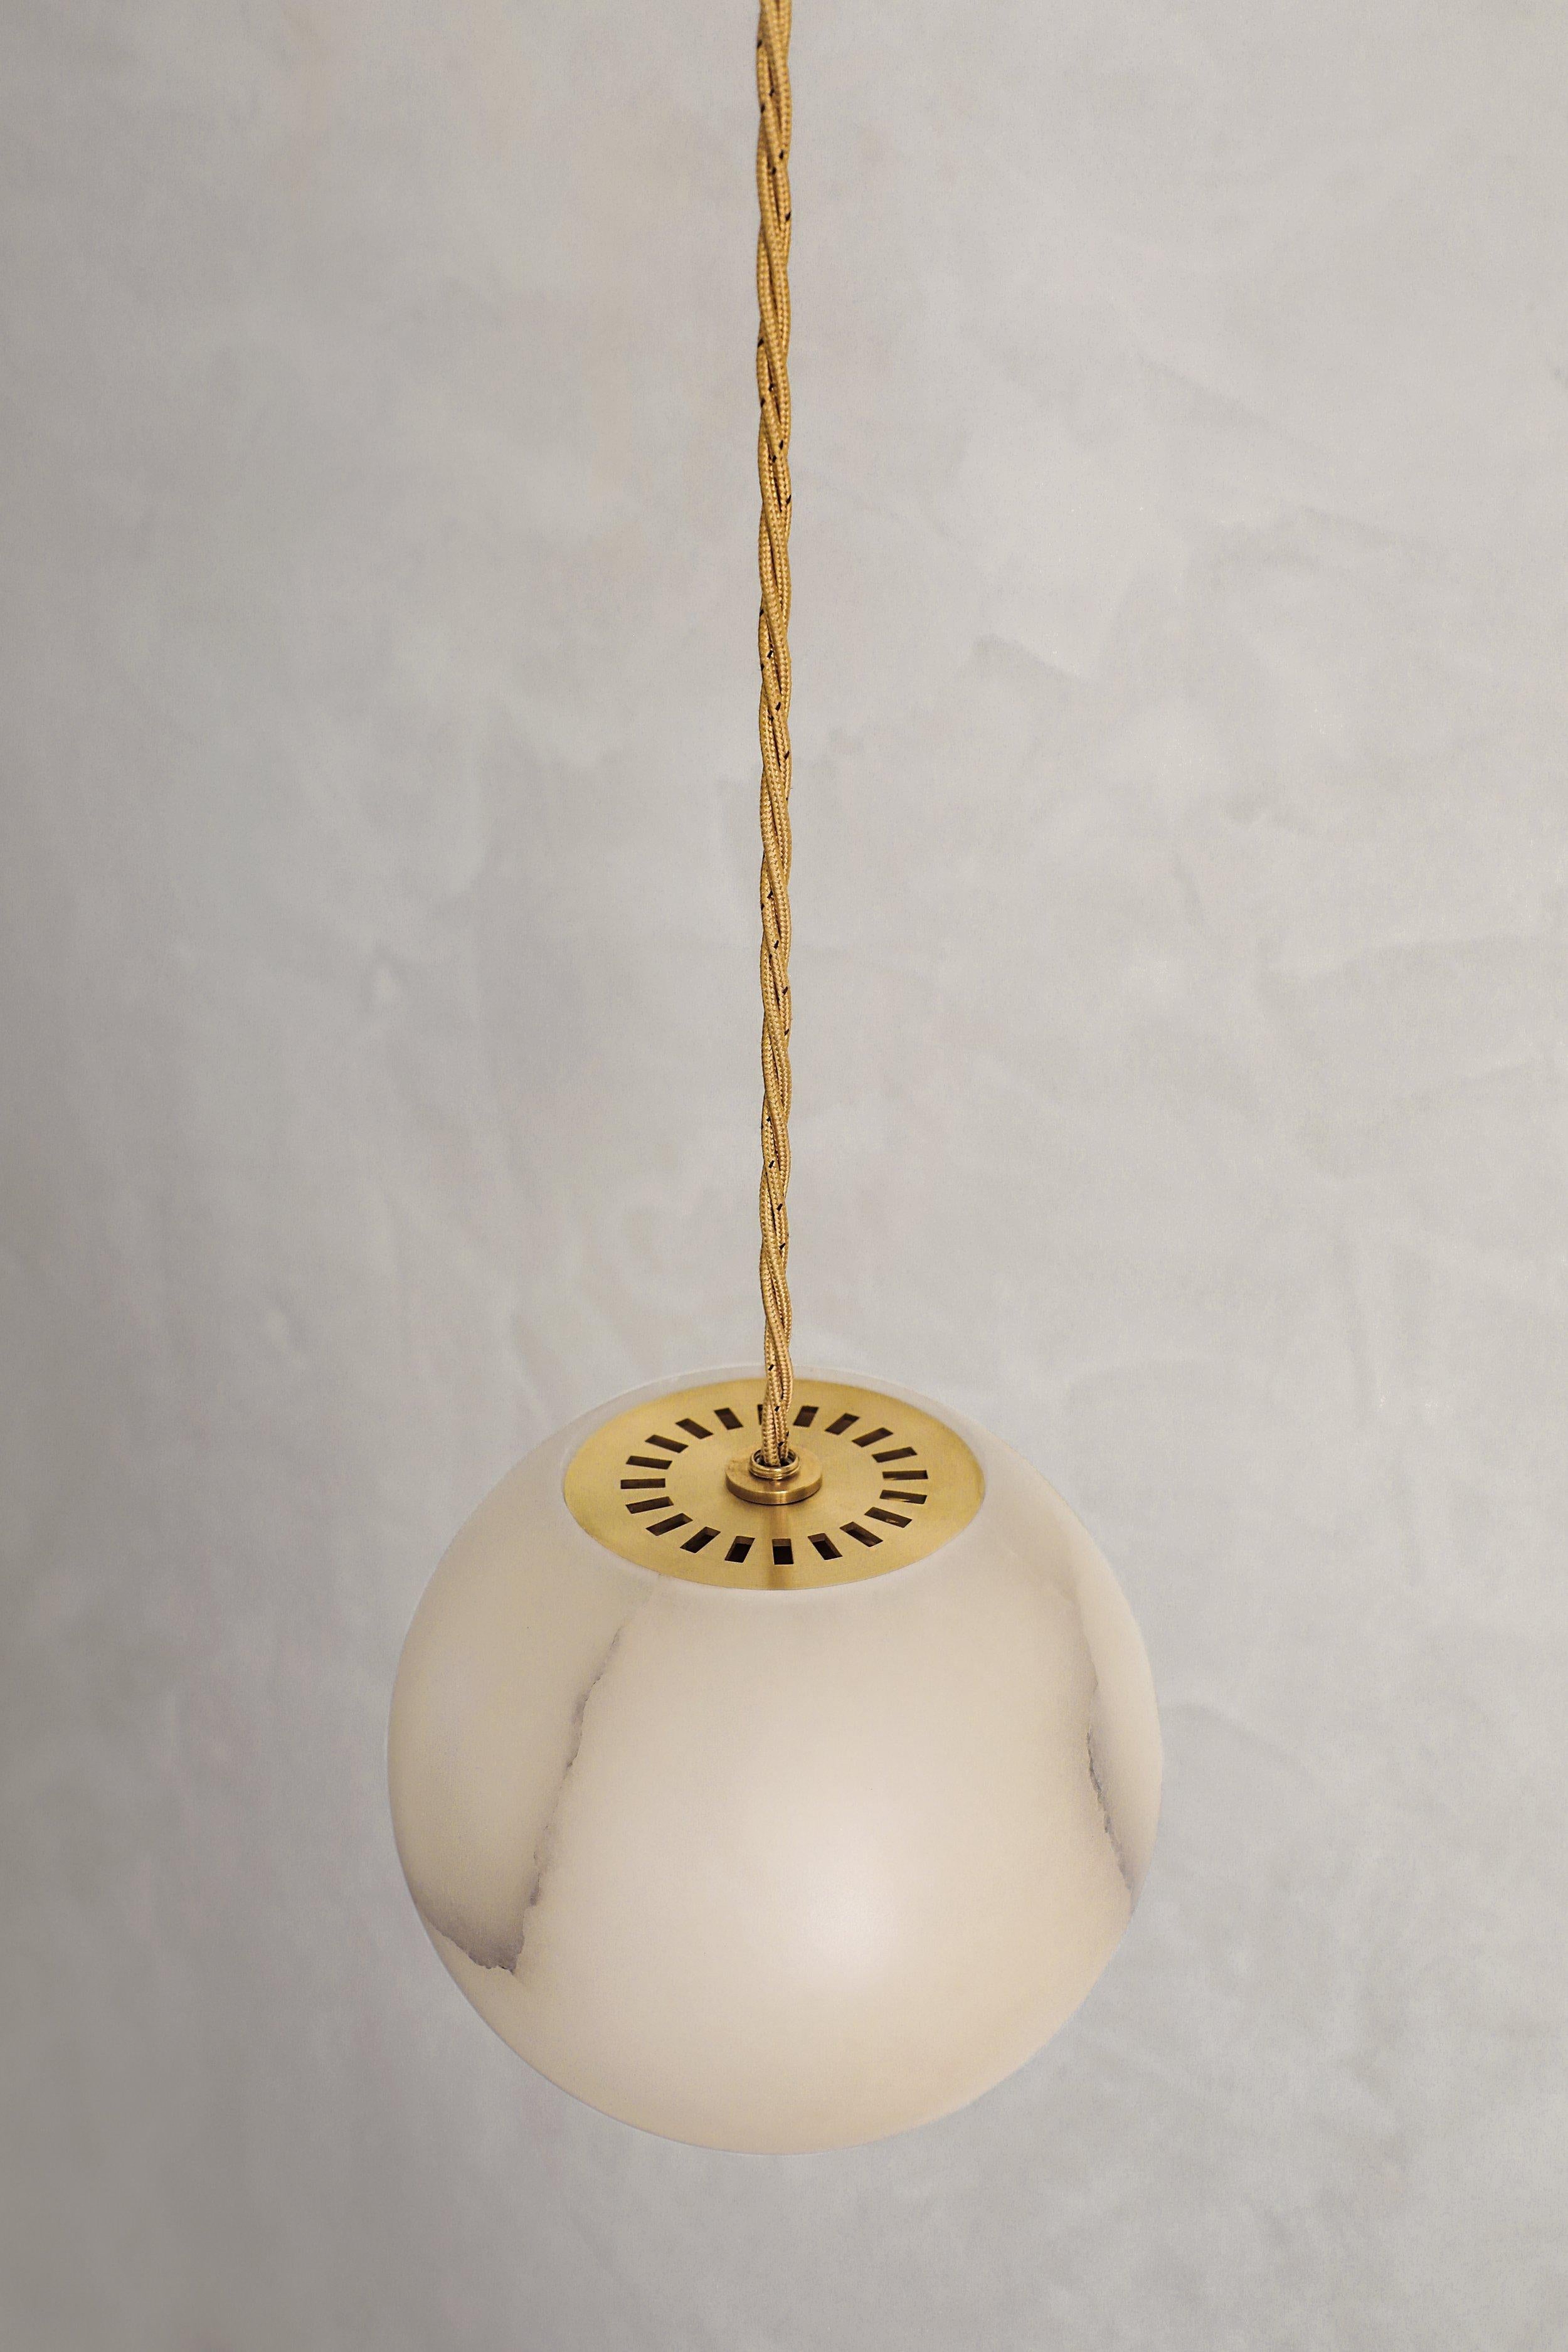 Planette Cable 18 Pendant by Contain
Dimensions: Ø 18 x H 100 cm (custom lenght).
Materials: Alabaster, brass, optical lens.

Also available in different finishes and dimensions (Ø12 cm / Ø16,5 cm / Ø18 cm x custom length). Please contact